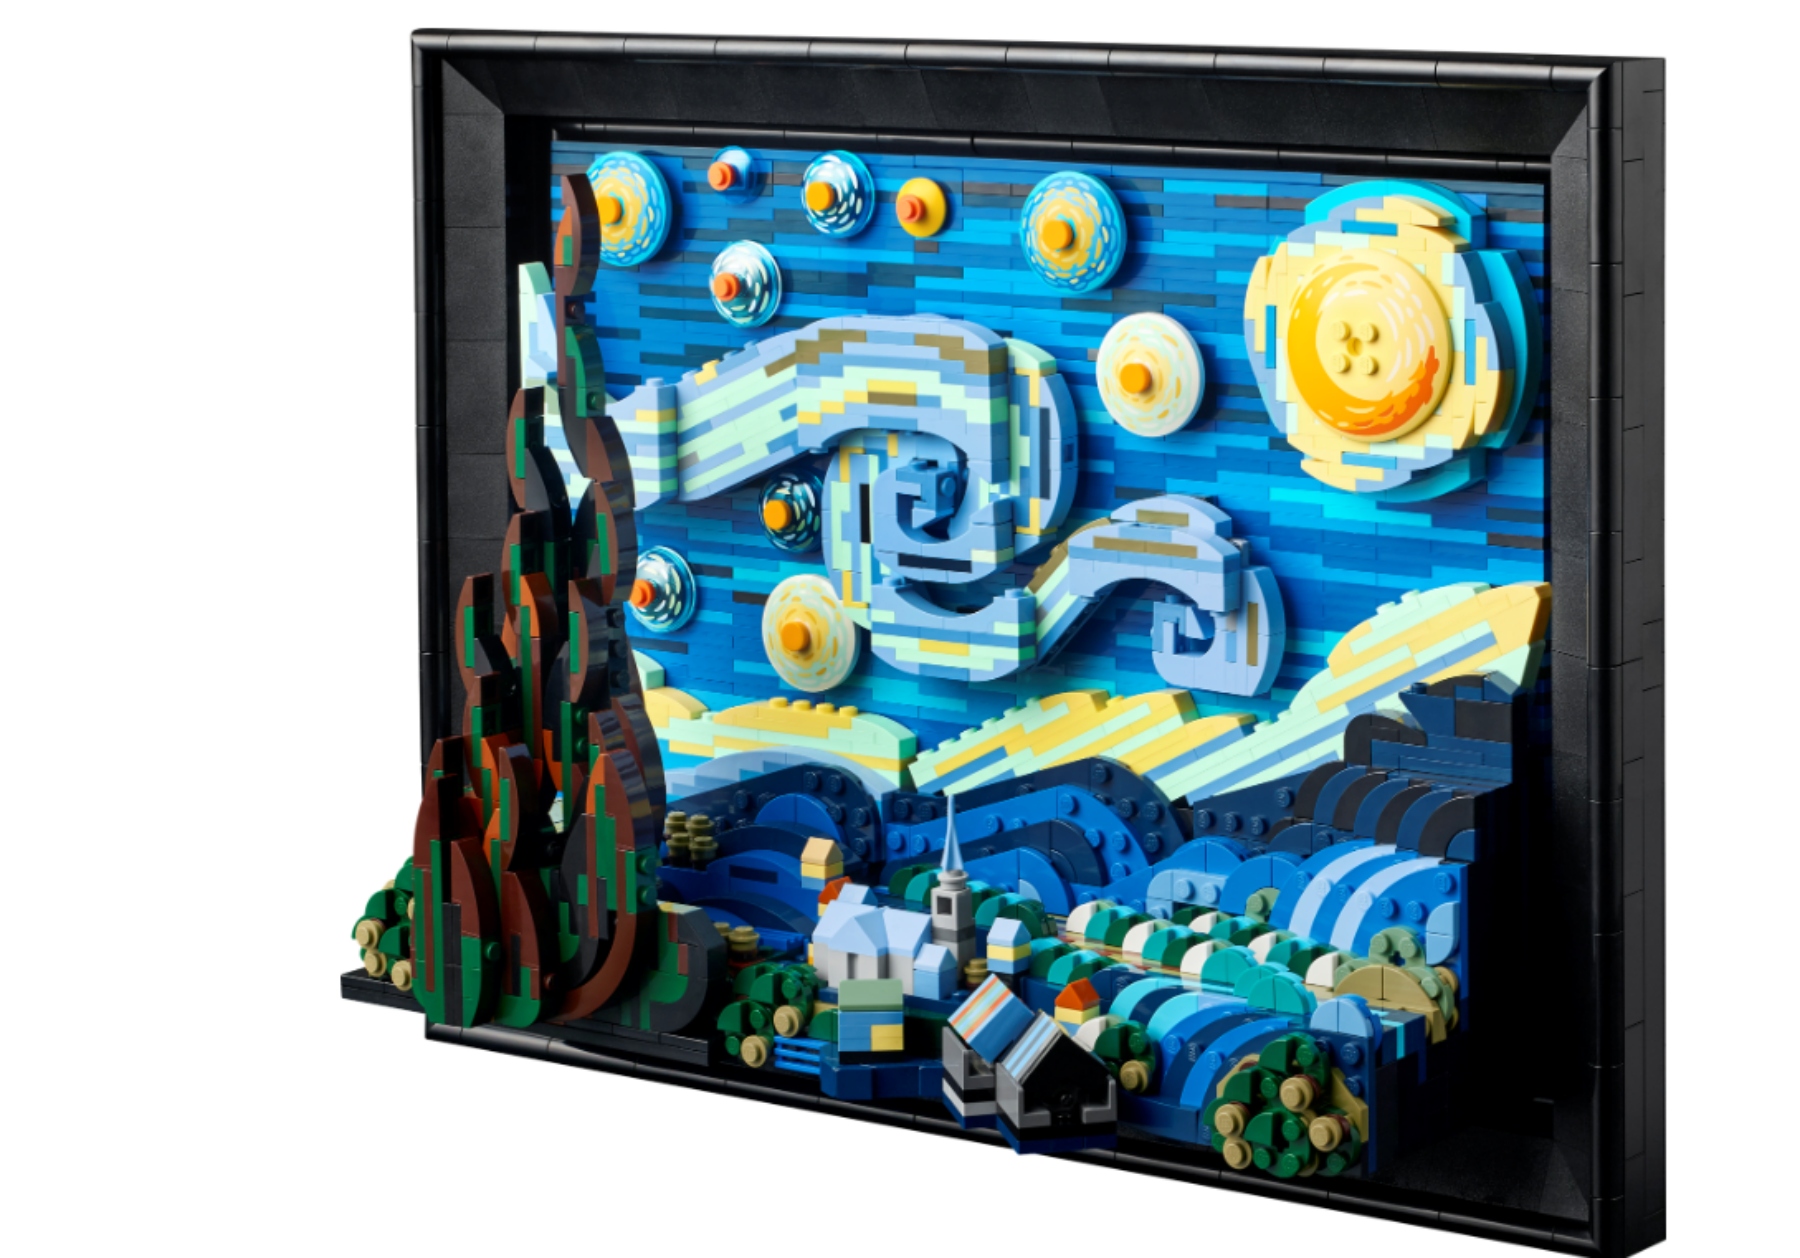 LEGO releases set inspired by Vincent Van Gough’s ‘The Starry Night’